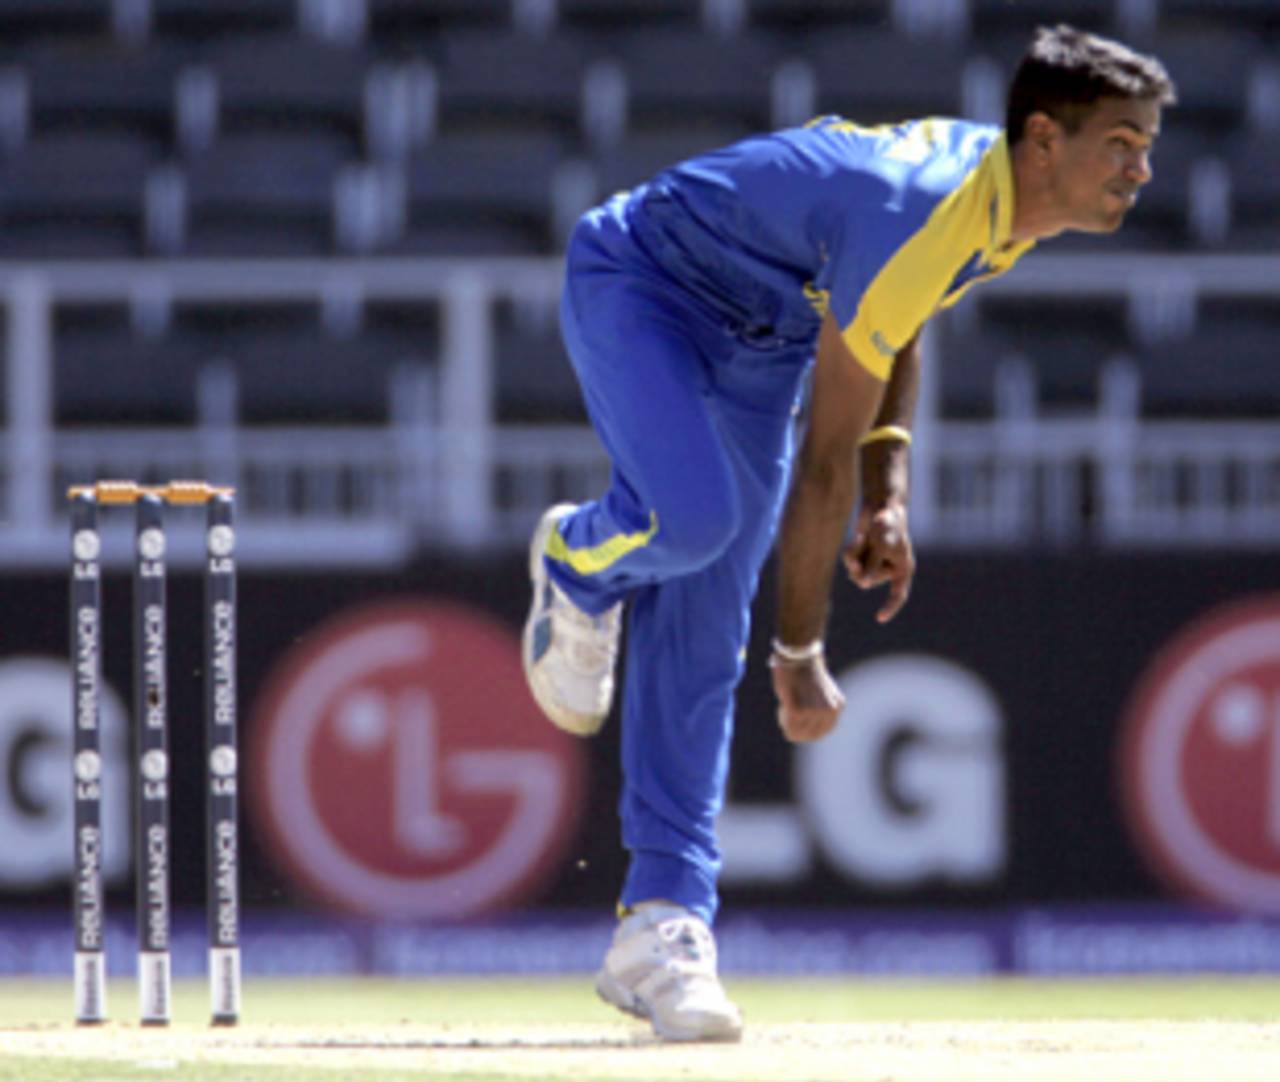 Nuwan Kulasekara is the second-best ODI bowler according to the ICC ratings, but even he has struggled in Australia and South Africa&nbsp;&nbsp;&bull;&nbsp;&nbsp;Associated Press